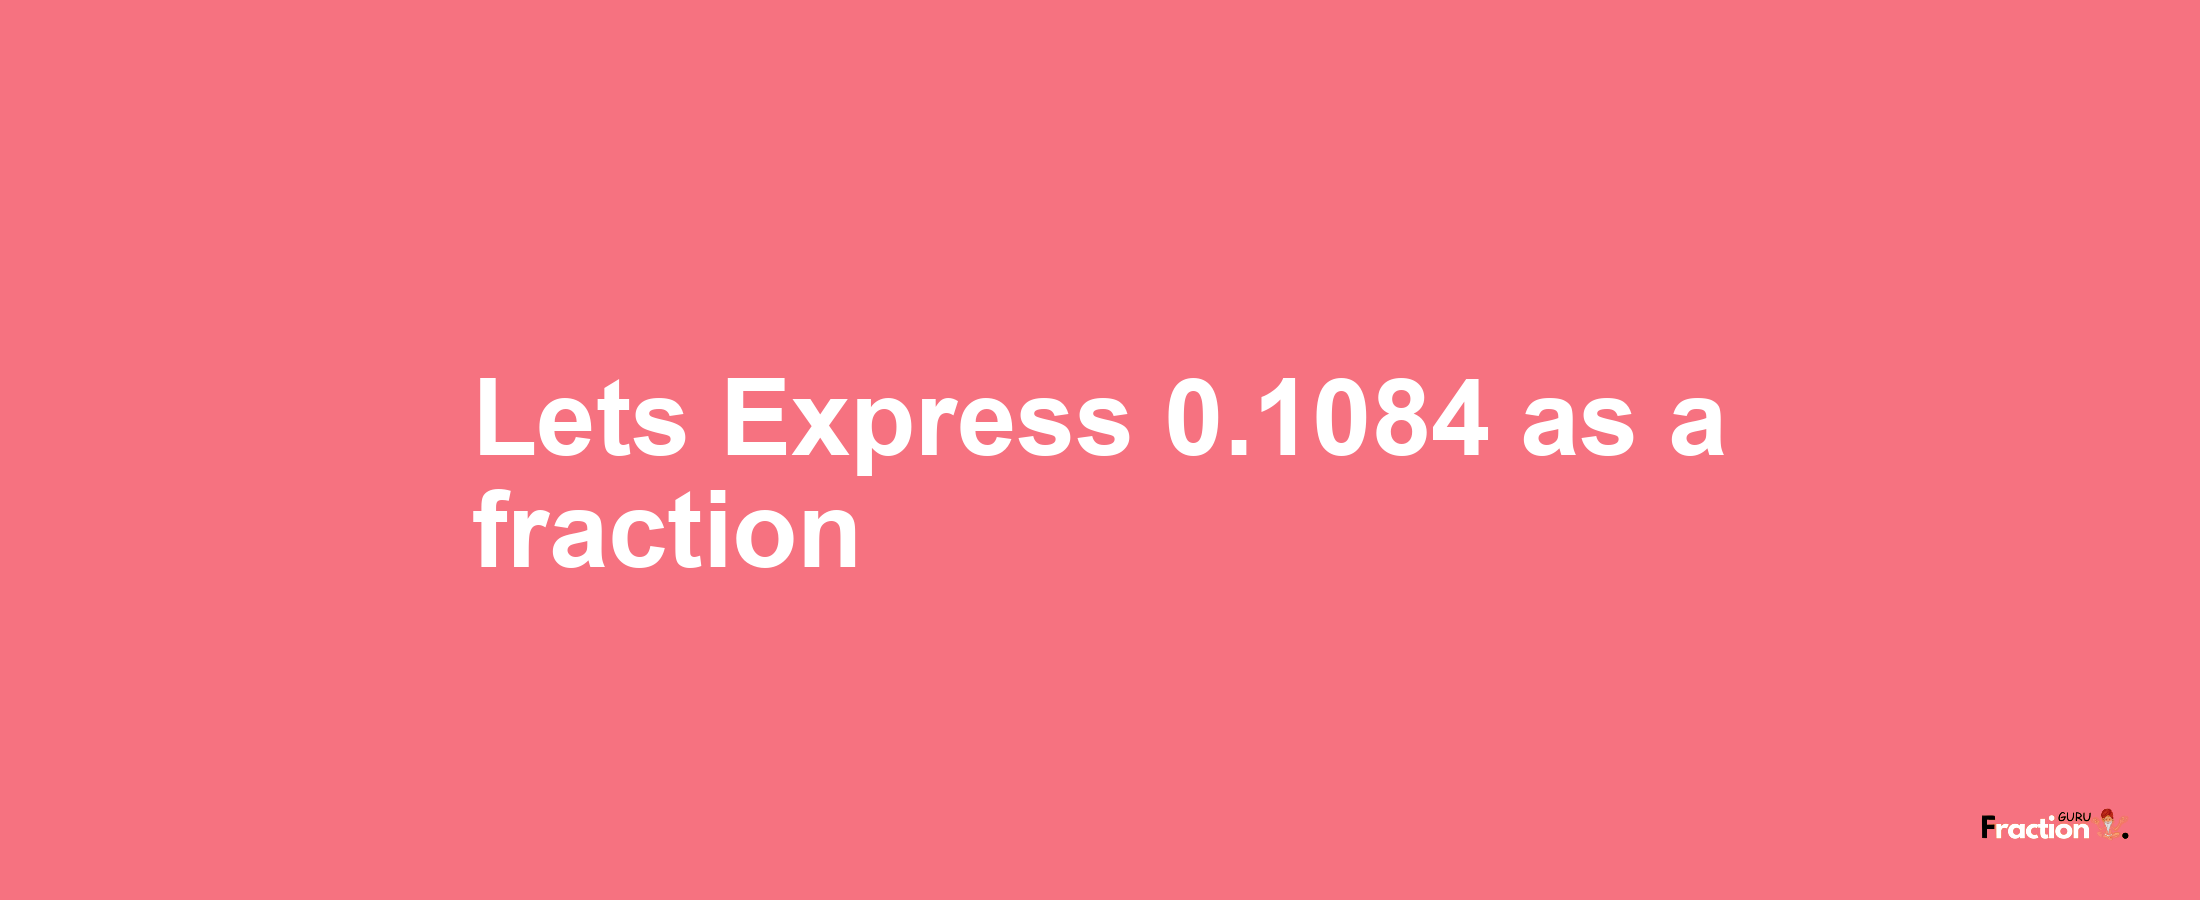 Lets Express 0.1084 as afraction